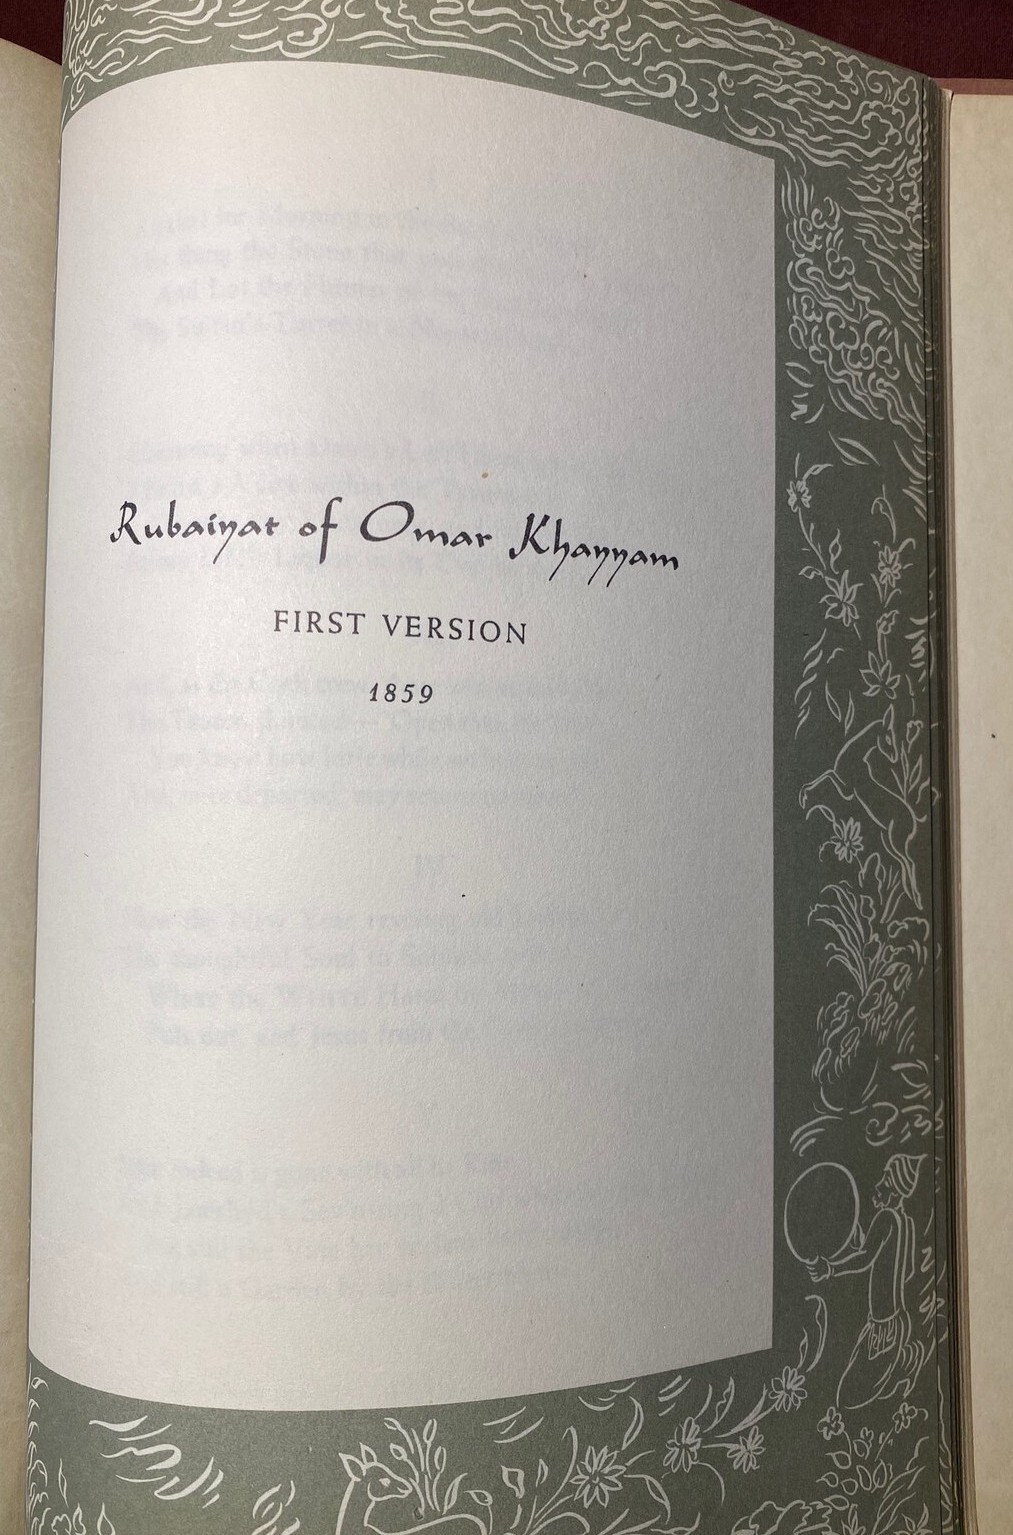 Page to start the first edition text